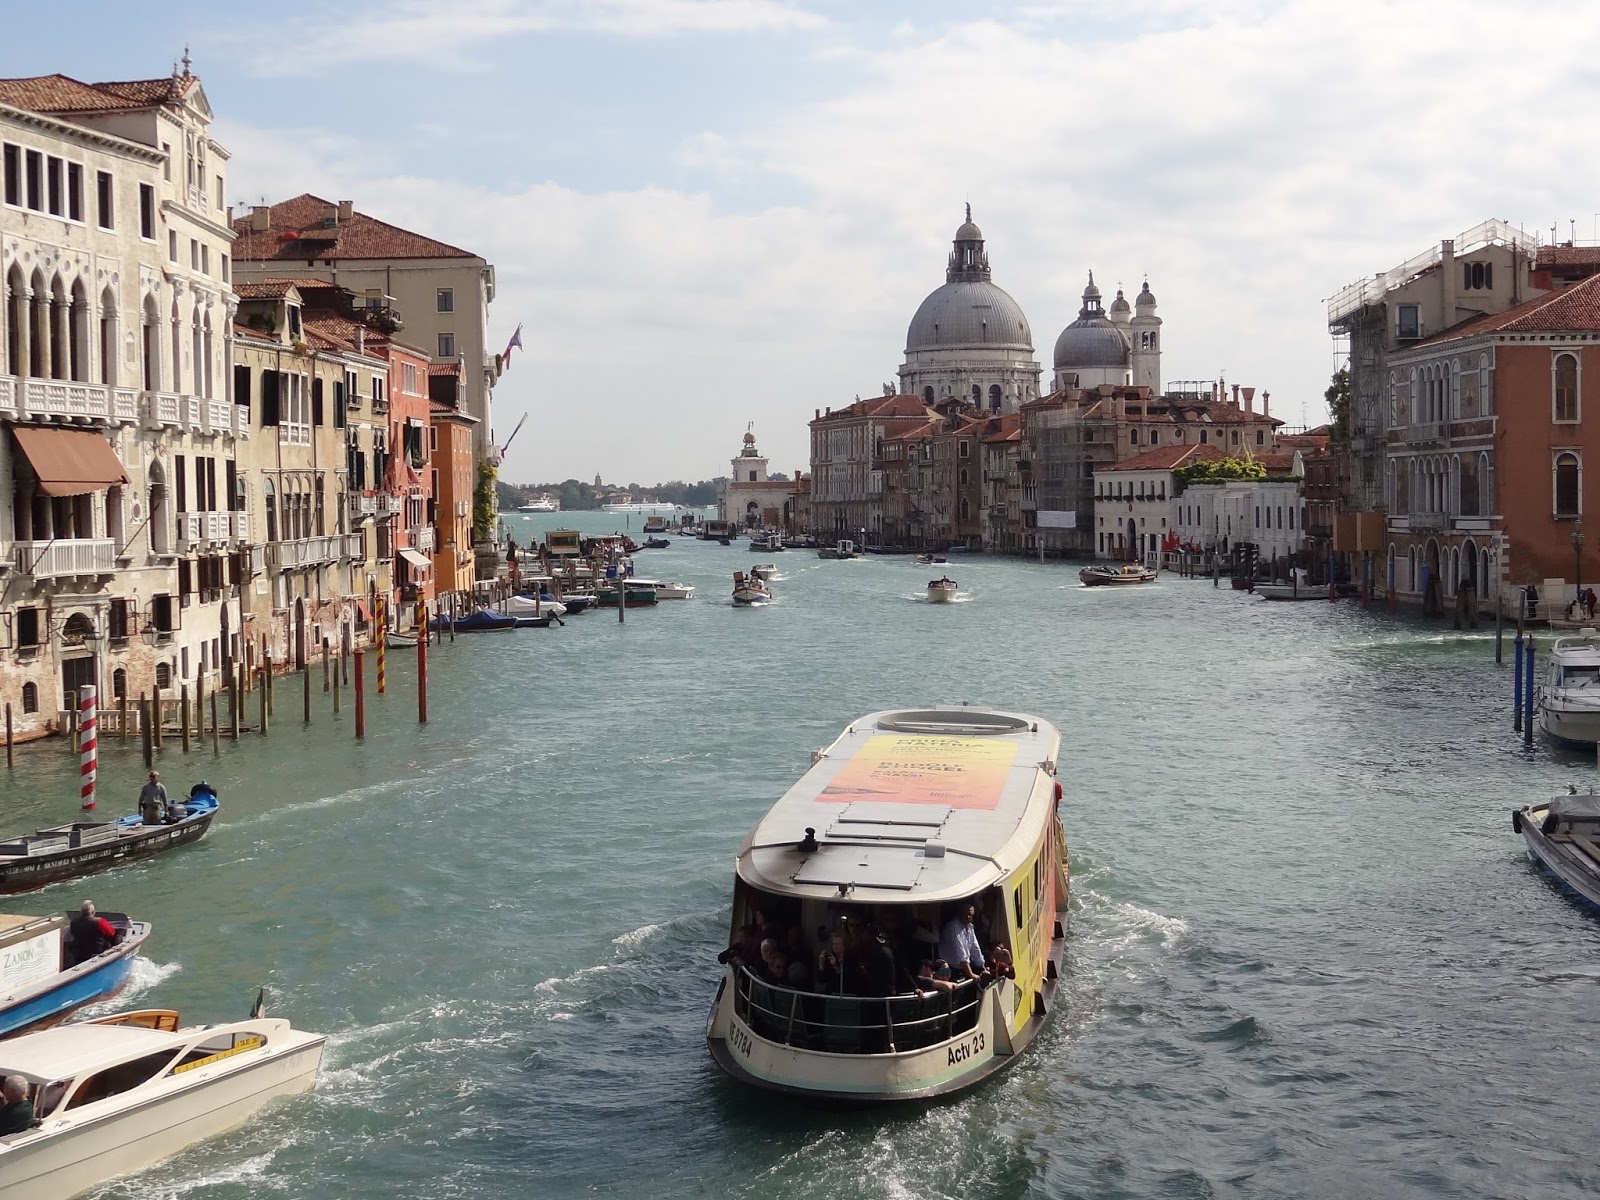 view of Venice Grand canal with large water taxi and St. Mark's Basilica in distances